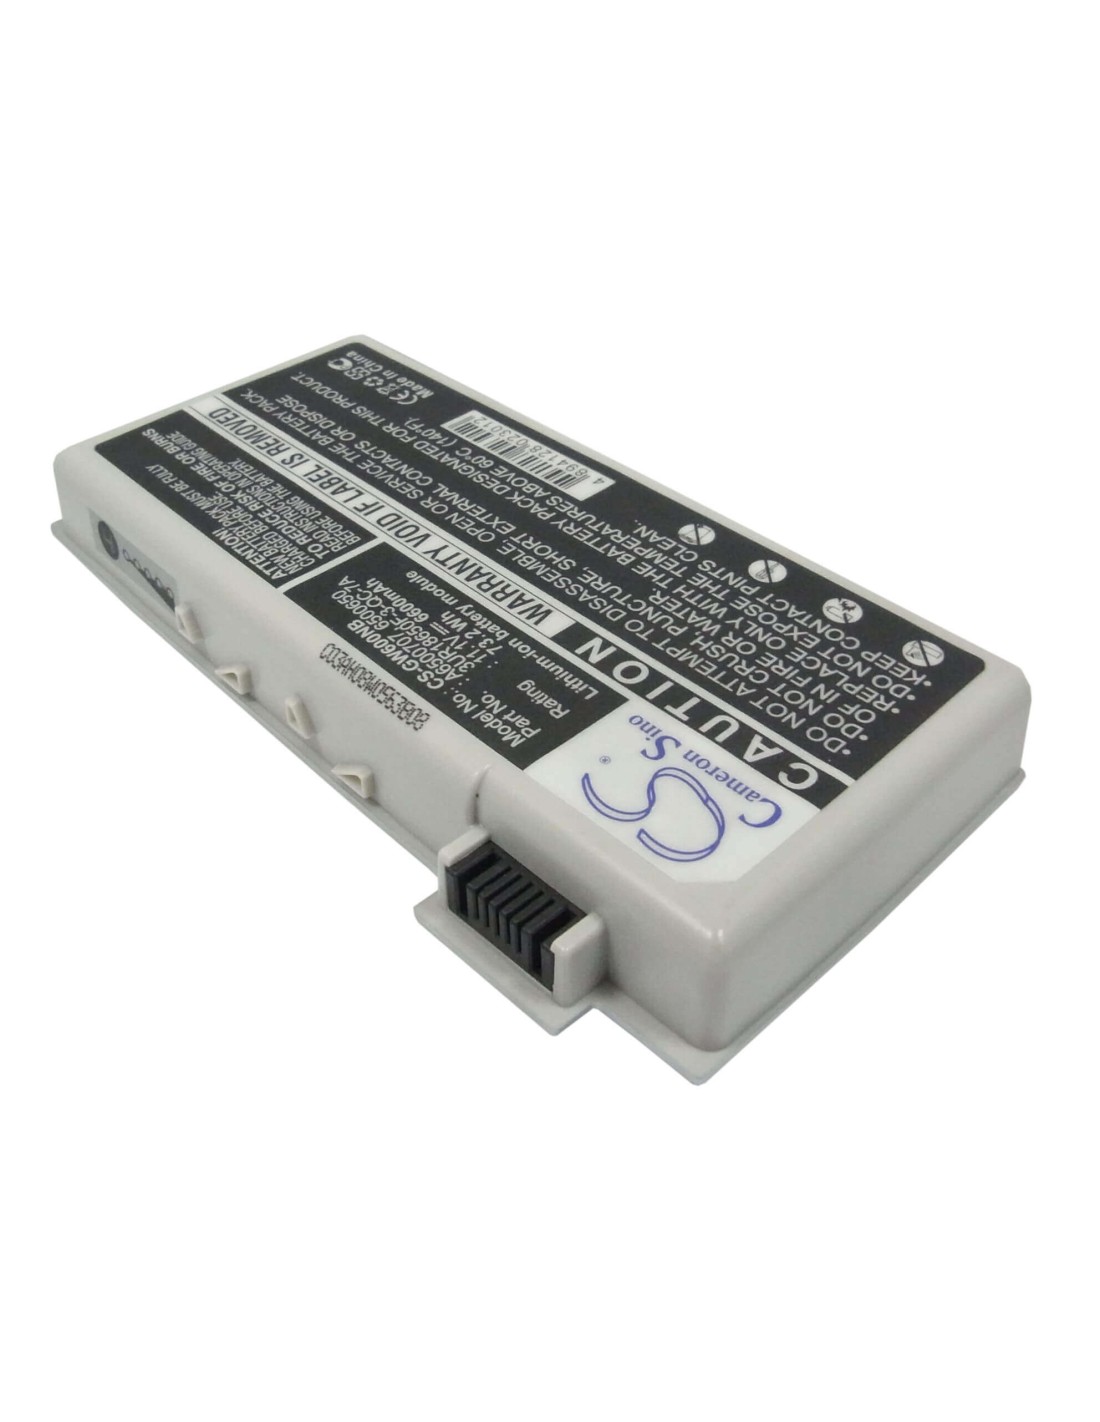 Silver Battery for Gateway Solo 600, Solo 600yg2, Solo 600ygr 11.1V, 6600mAh - 73.26Wh